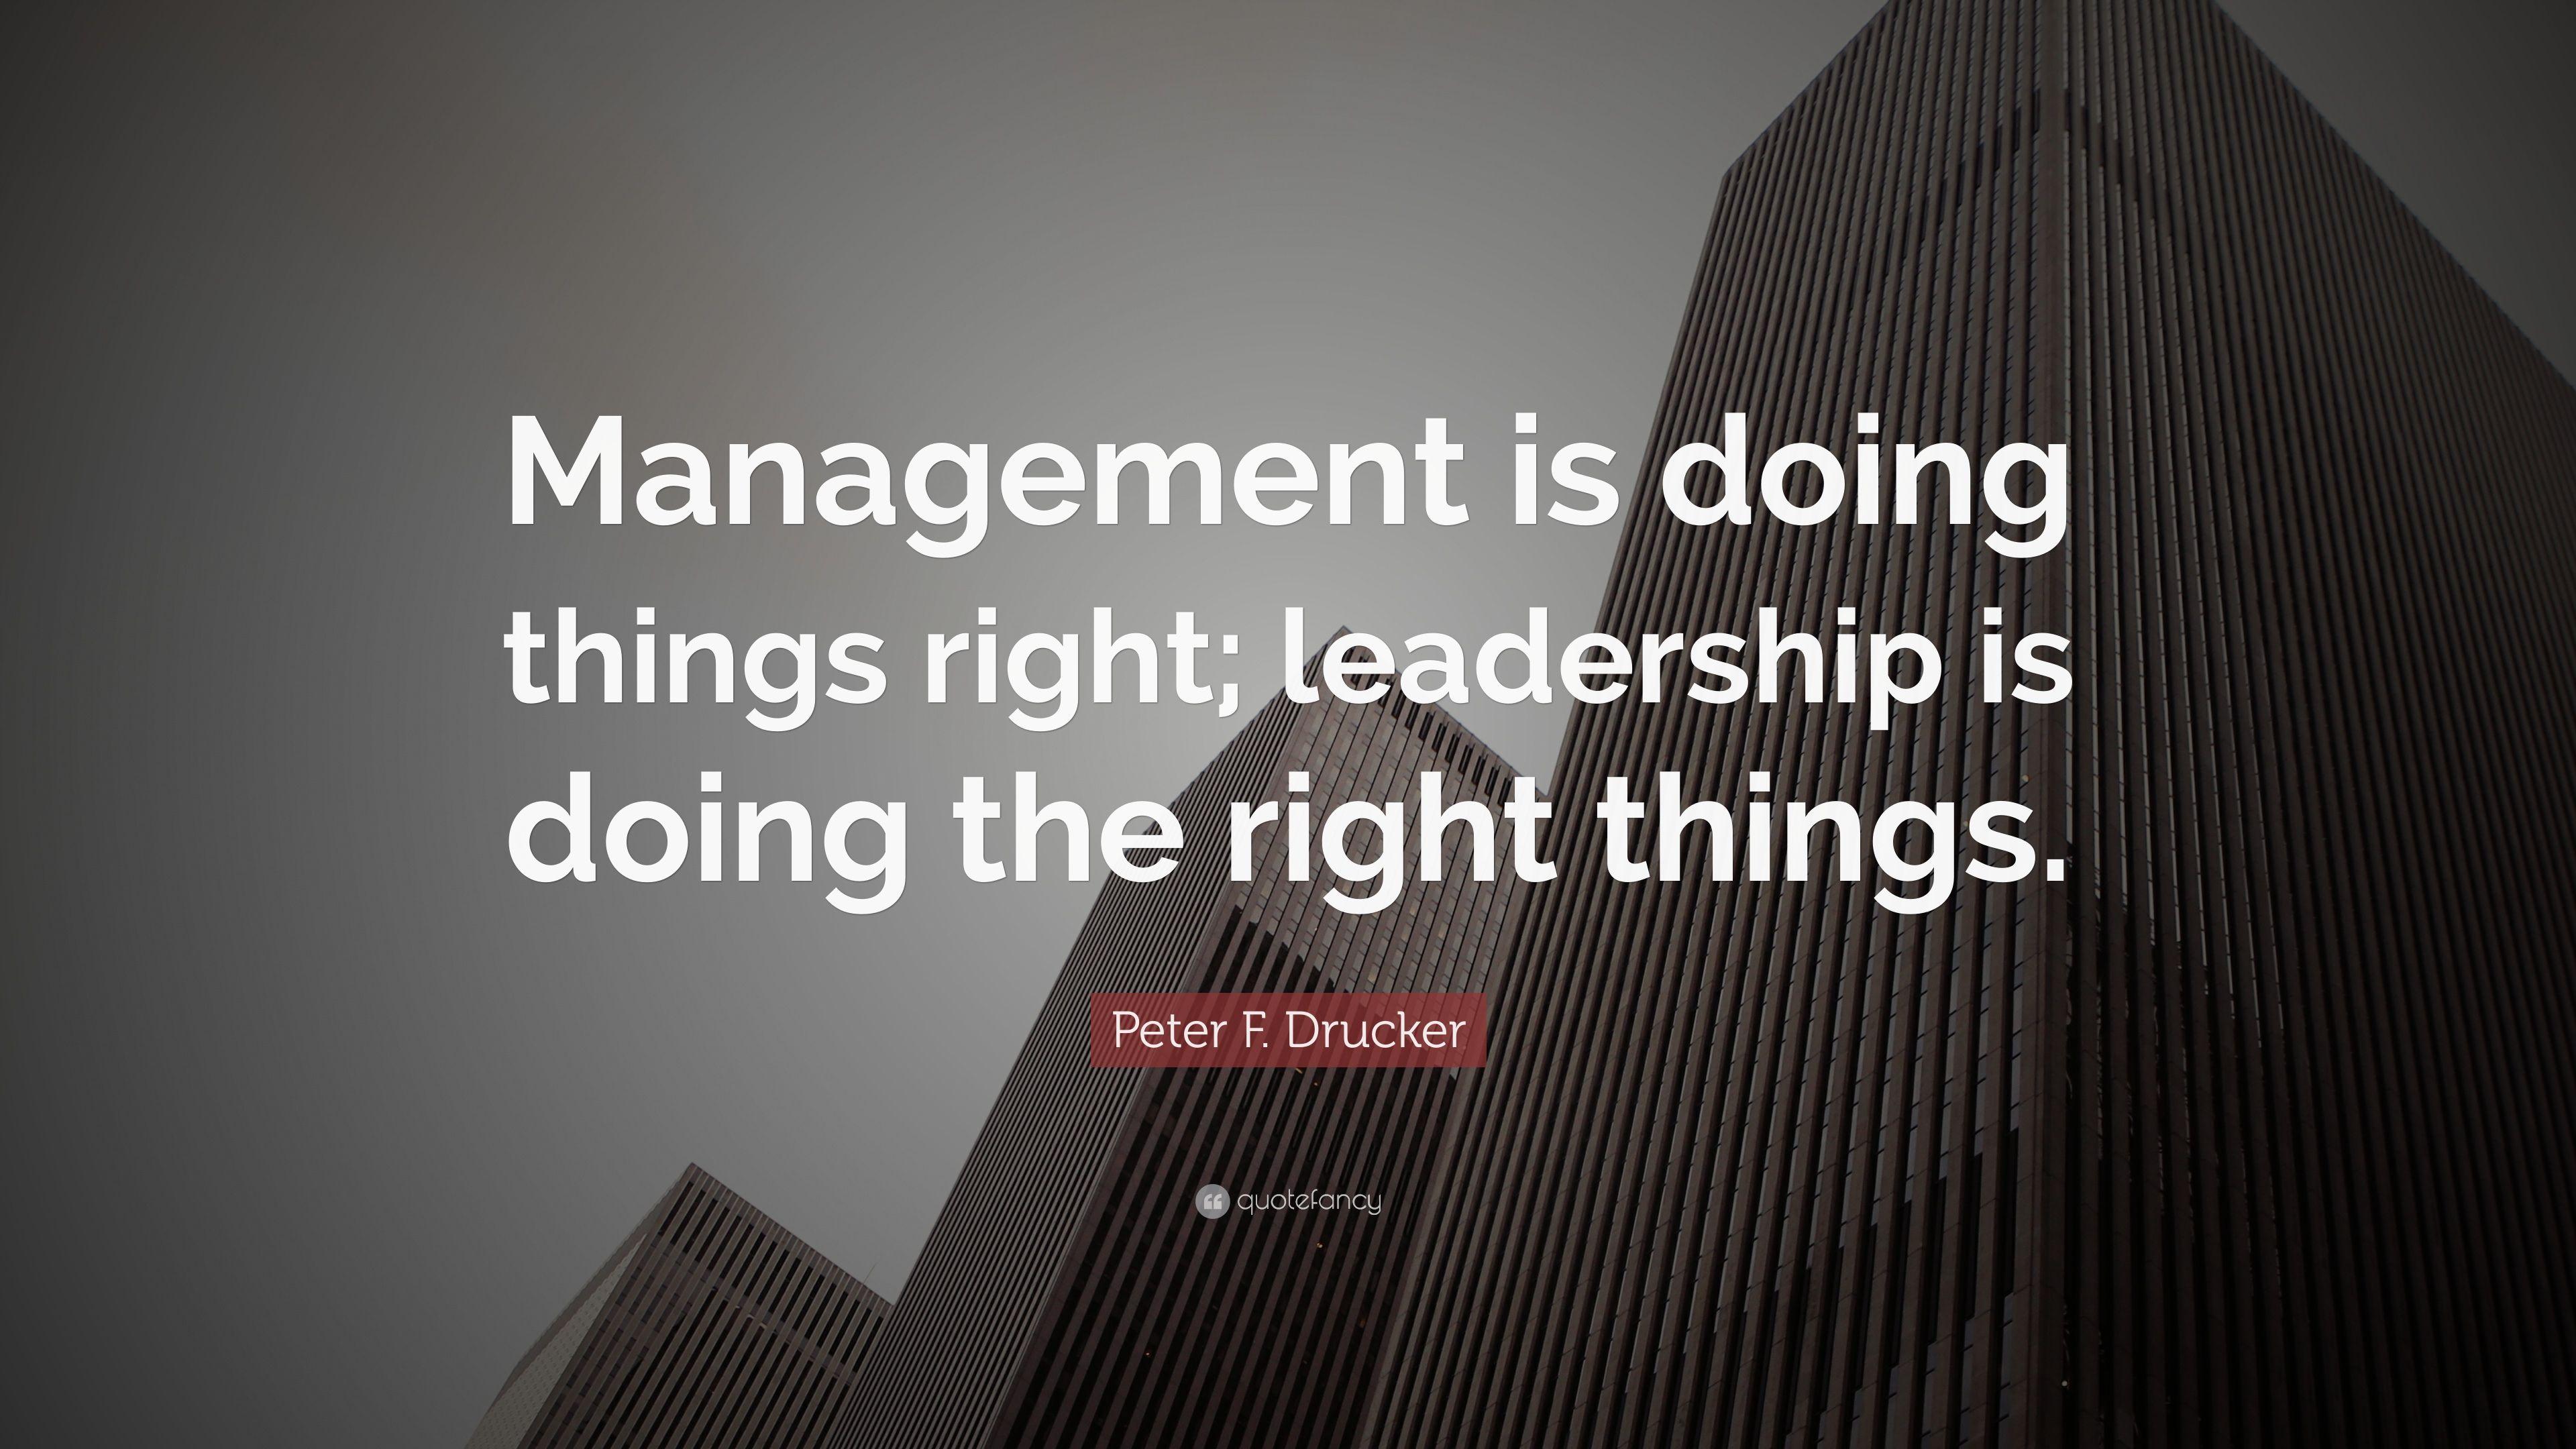 Peter F. Drucker Quote: “Management is doing things right